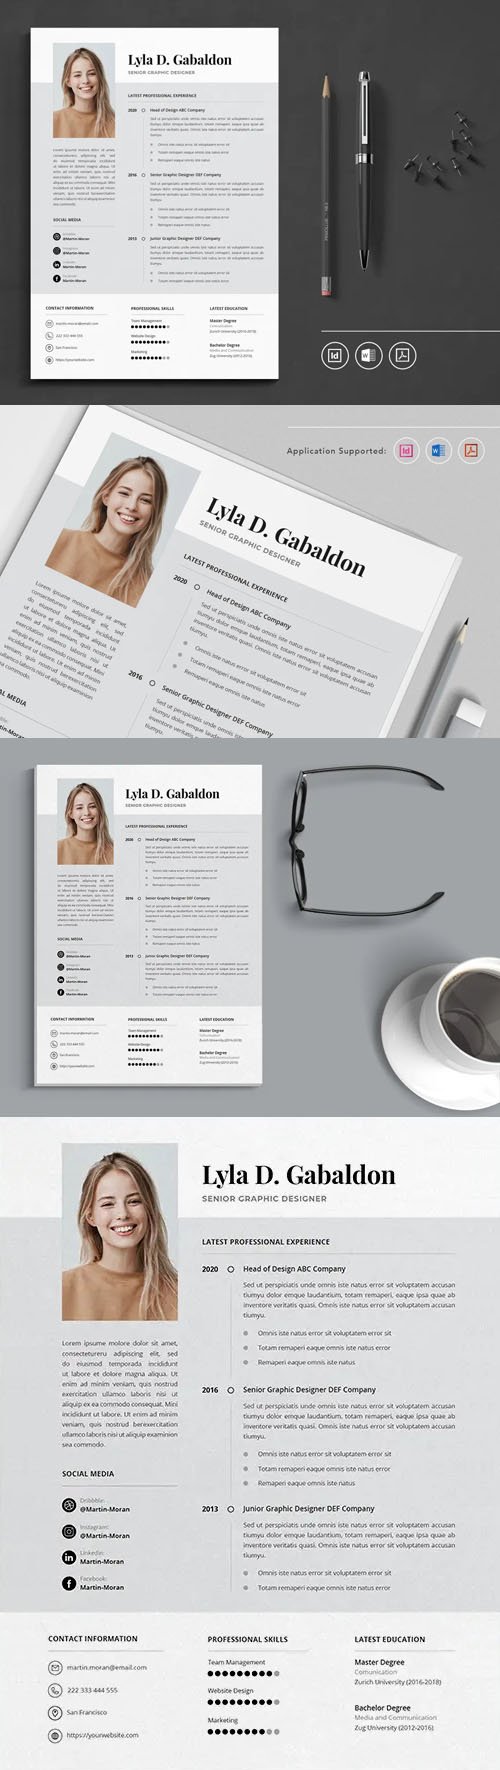 CV Resume Indesign Template + MS WORD Template